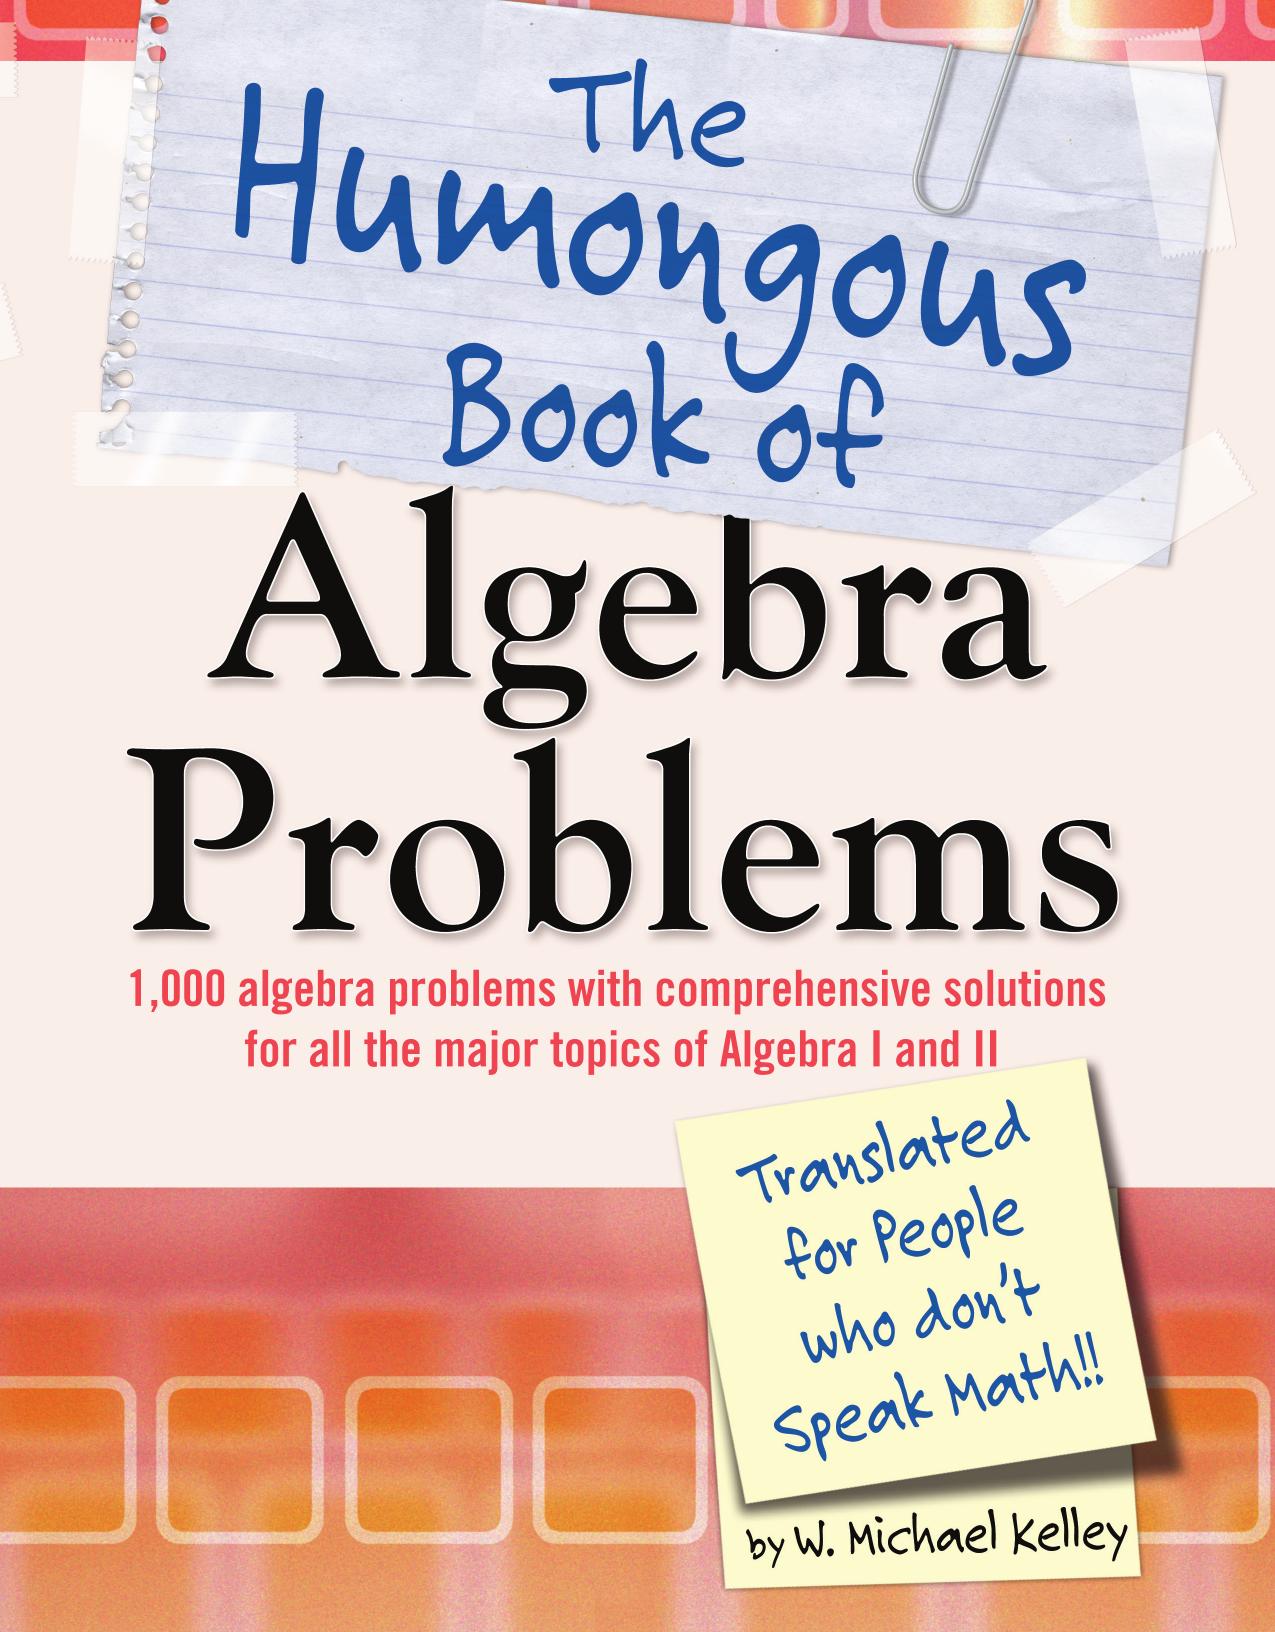 The Humongous Book of Algebra Problems: Translated for People Who Don't Speak Math!!